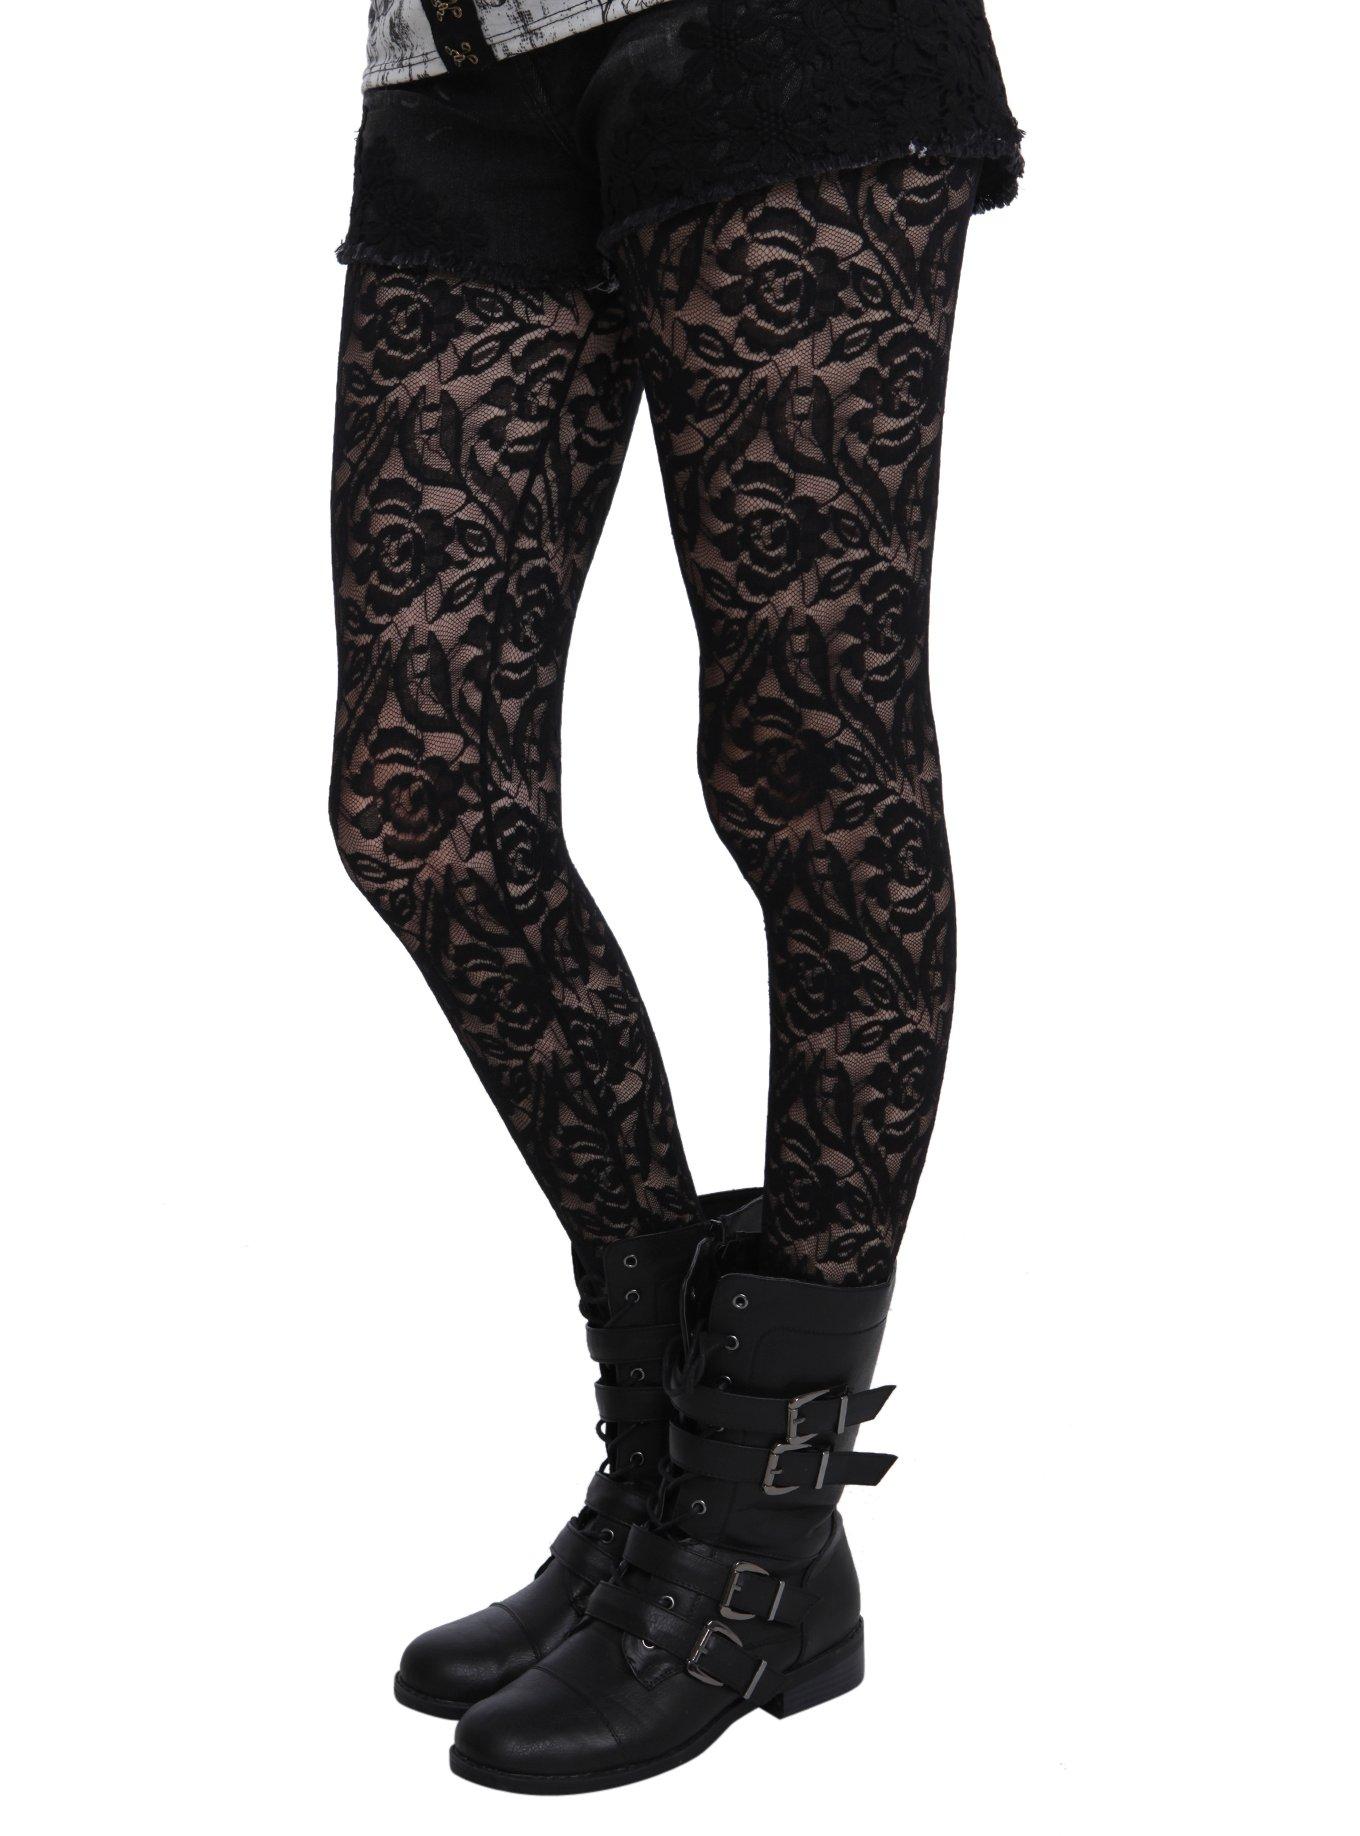 Only Hearts I Heart Lace Leggings Control Top Black 20554 - Free